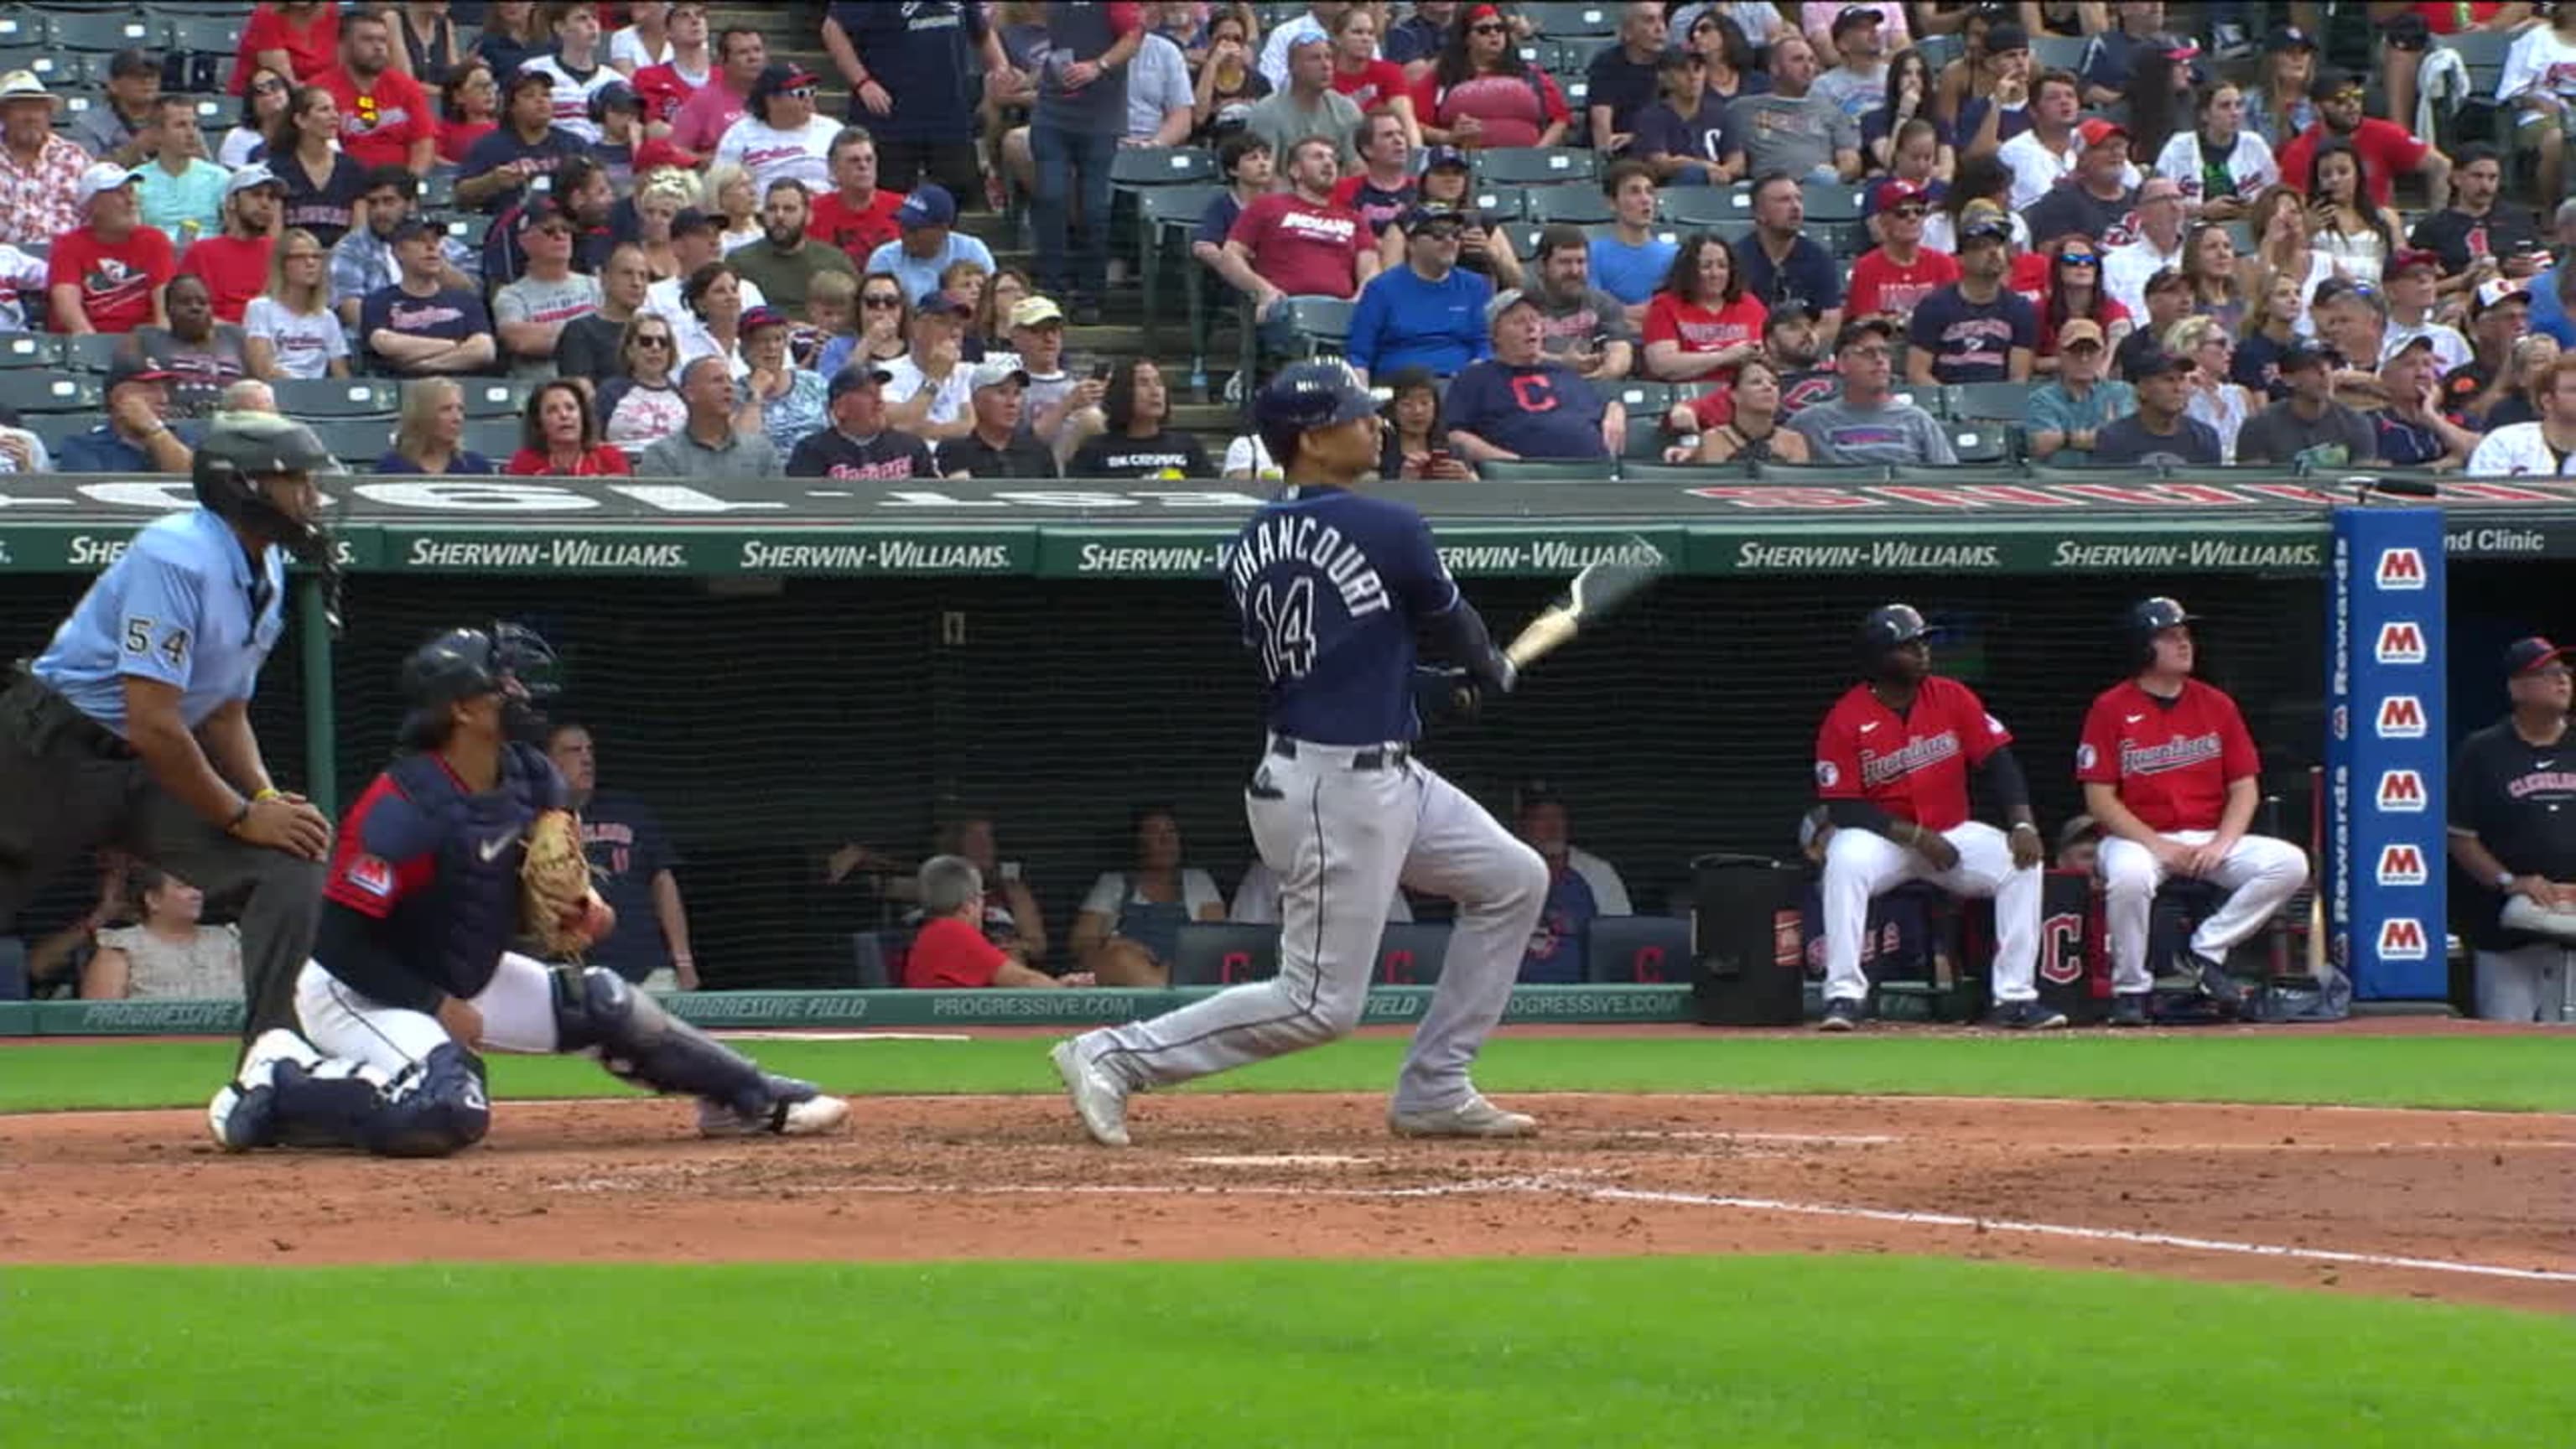 Christian Bethancourt tapping into power to give A's lineup some